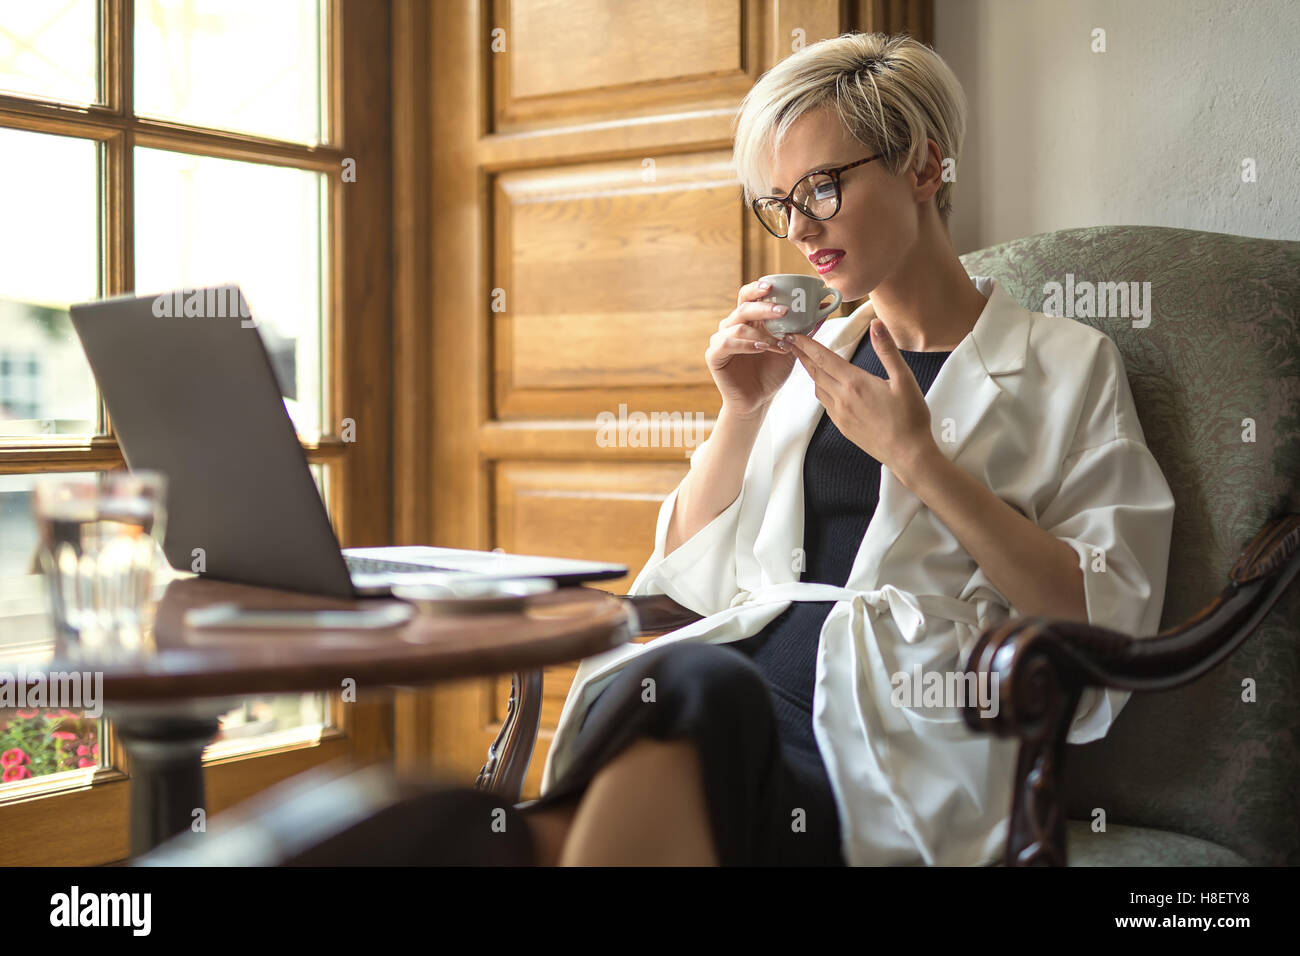 Girl with laptop and cup in cafe Stock Photo